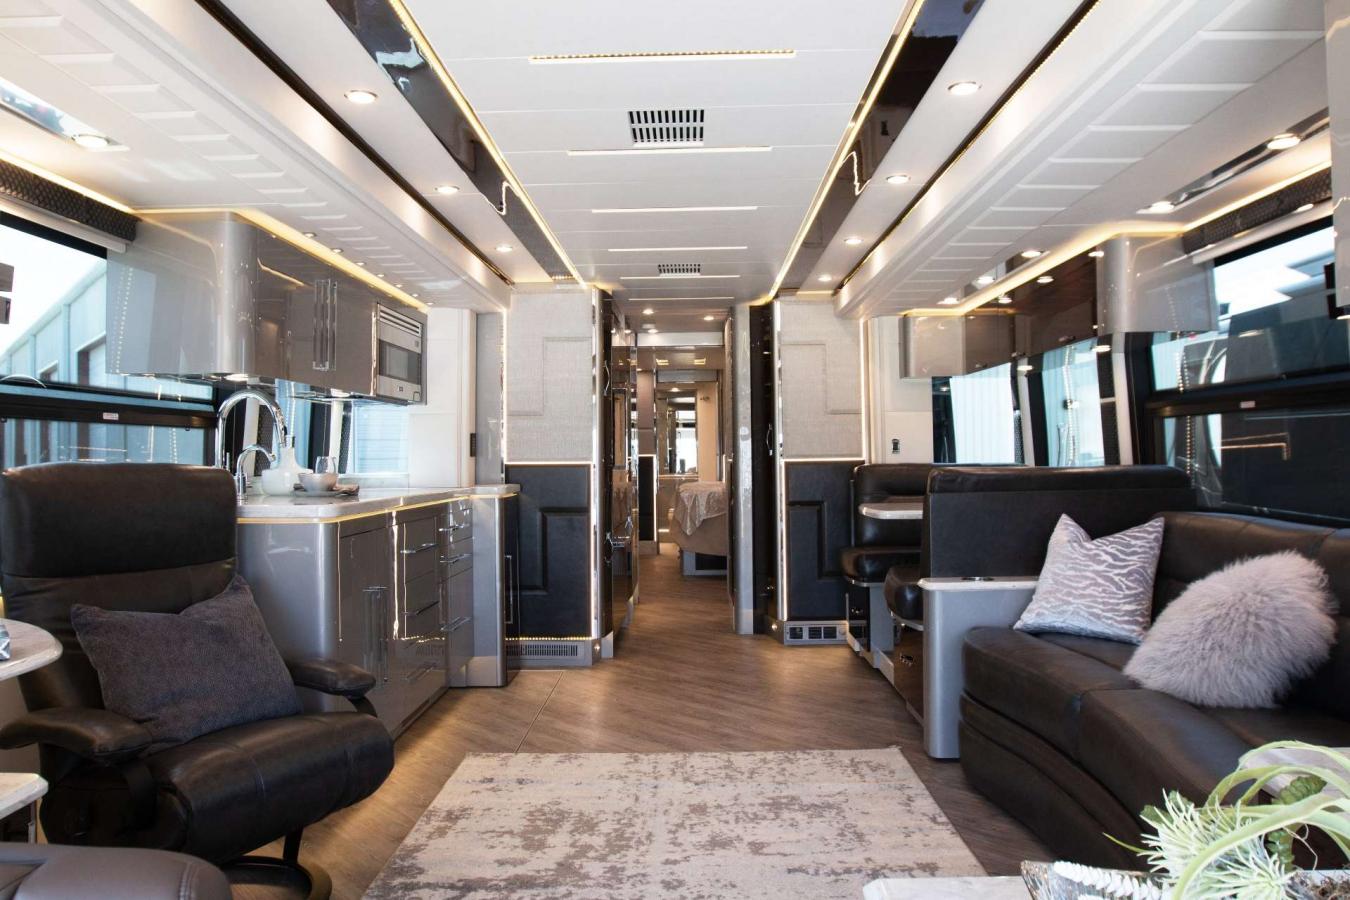 Interior shot of the living area of an Emerald Luxury Coach RV